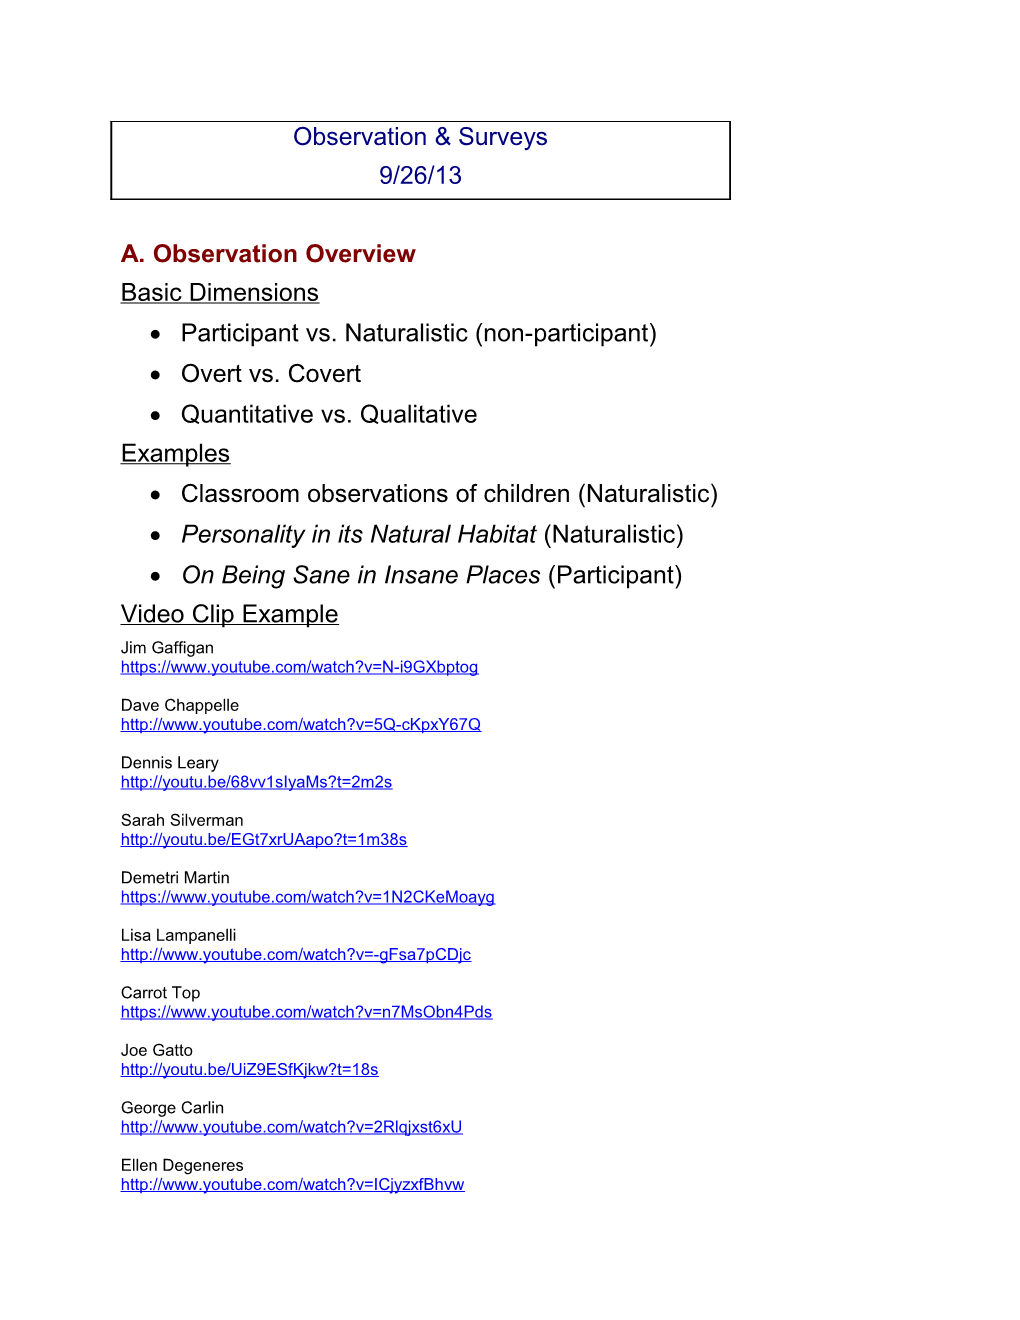 A. Observation Overview